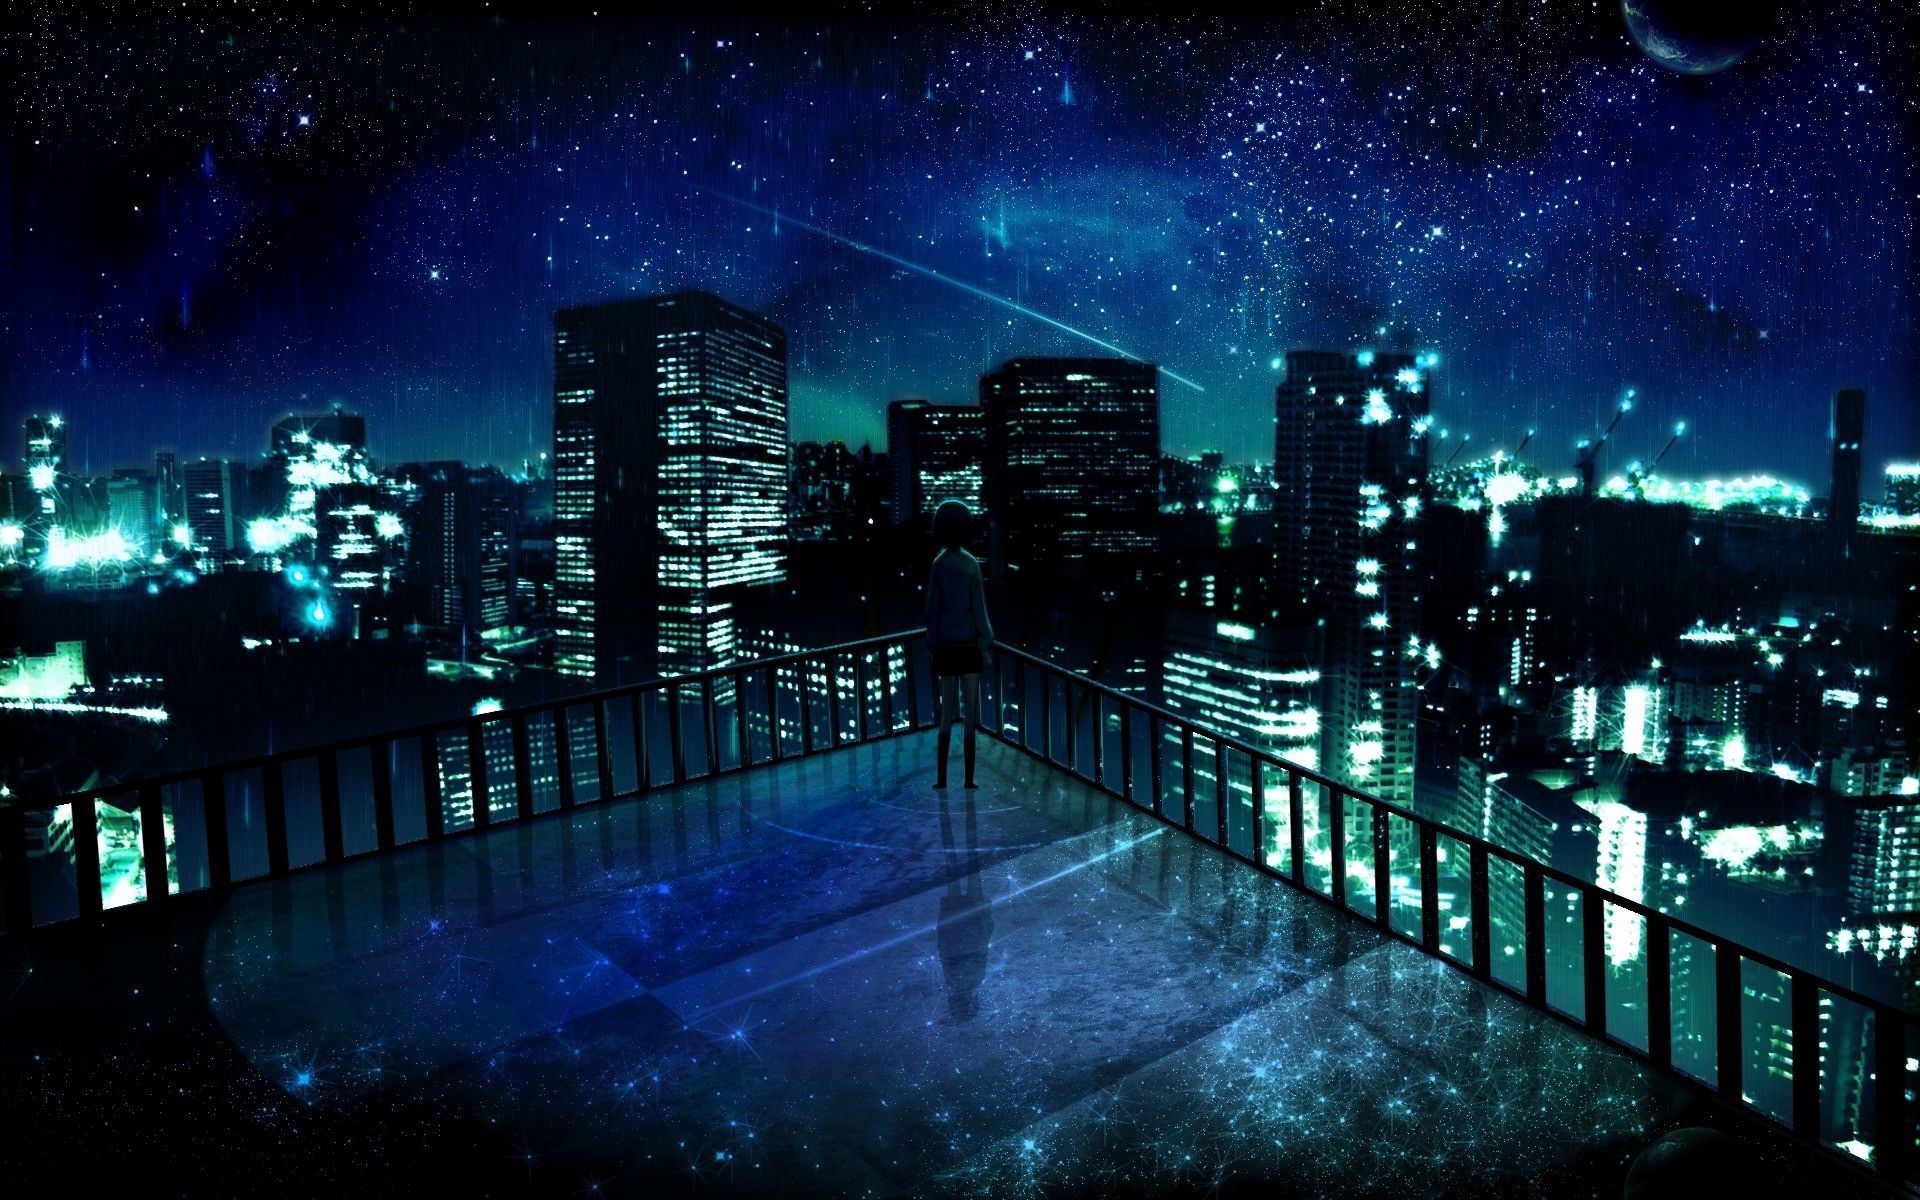 Dark Anime Scenery Lovely Dark Anime Background SceneryDownload Free Stunning Wallpaper for Desktop Puters and Of the Day of The Hudson